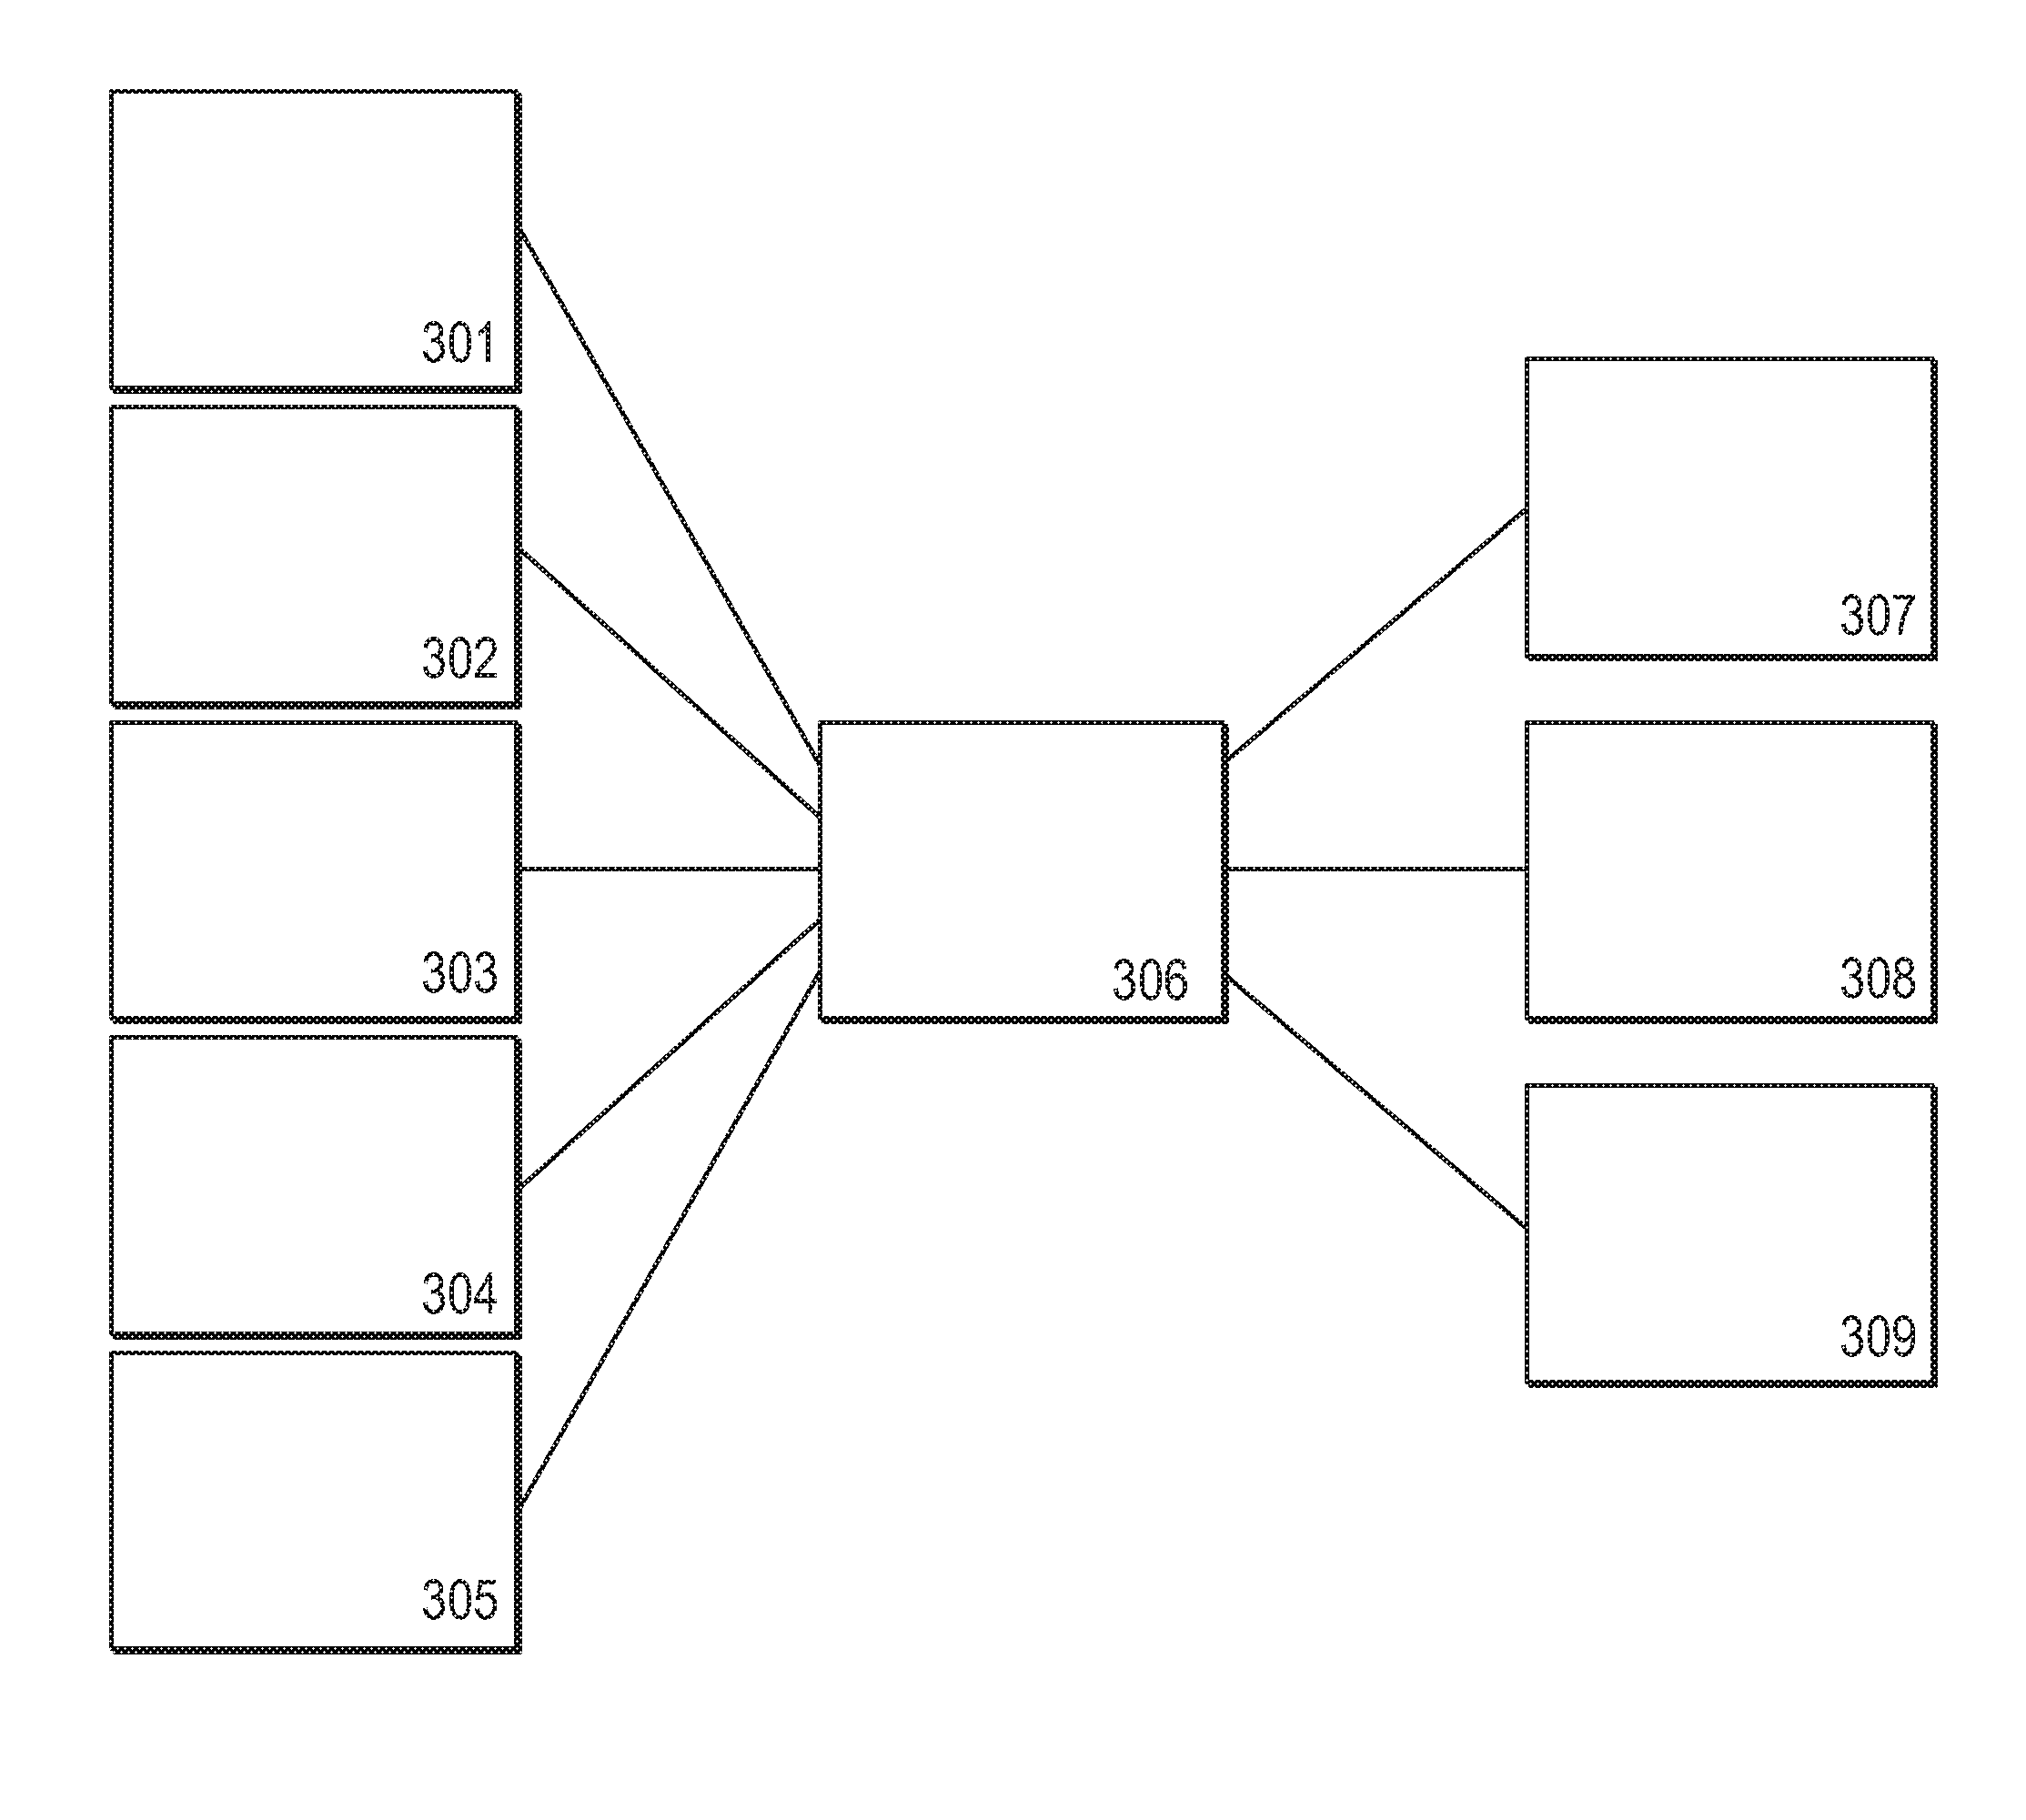 System and Method for Managing Data Across Multiple Environments